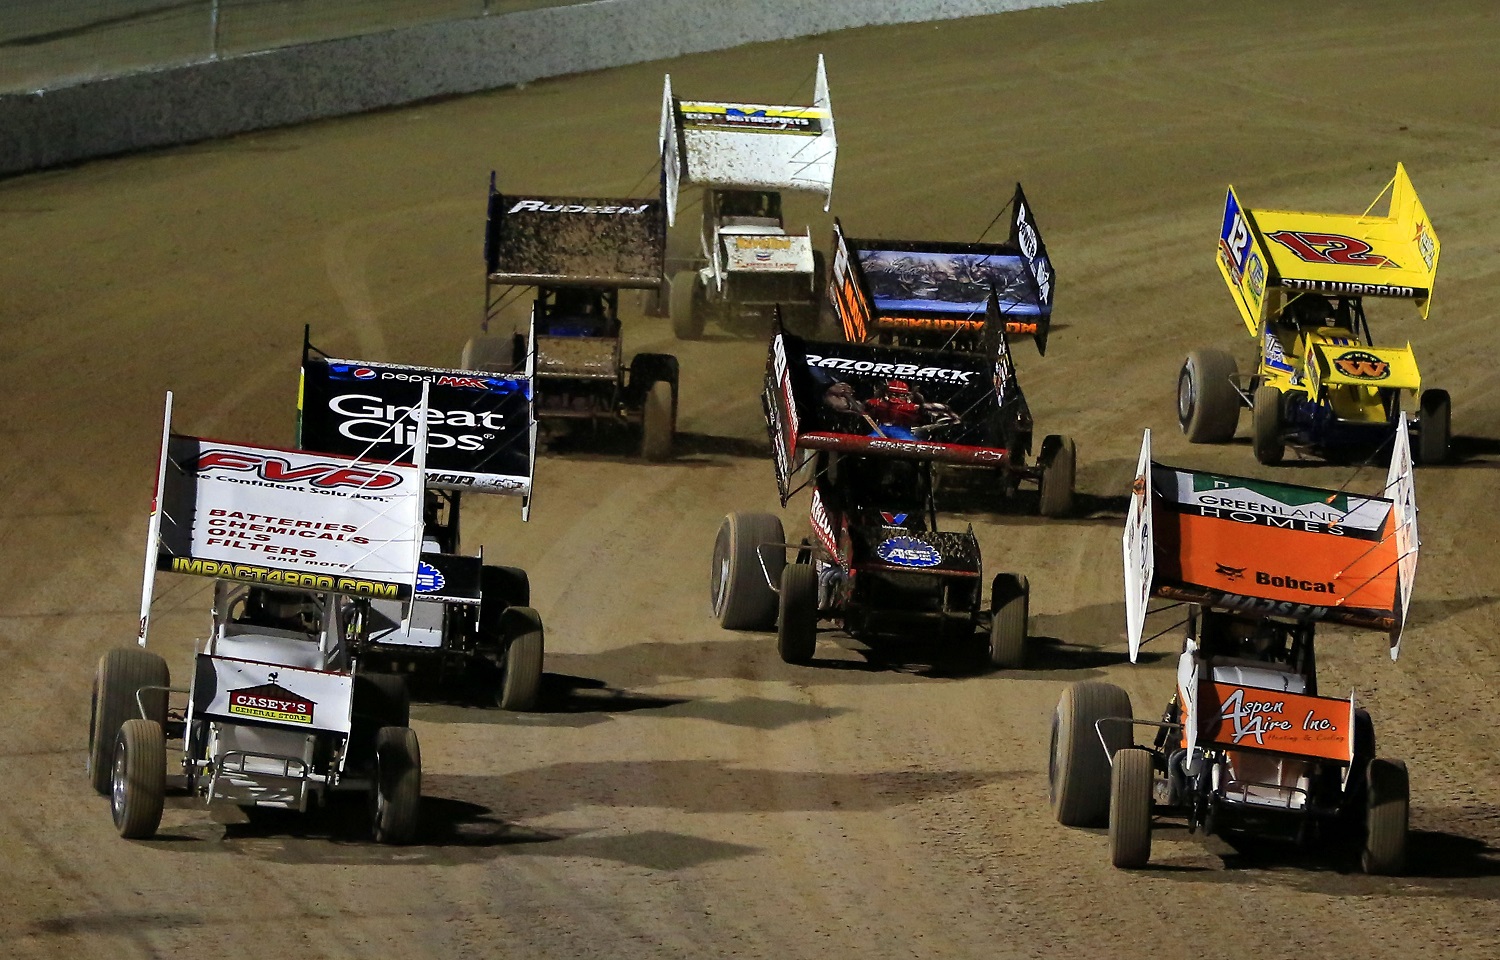 The World Of Outlaws Sprint Car FVP Outlaw Showdown at the Dirt Track at Las Vegas Motor Speedway in March 2015.